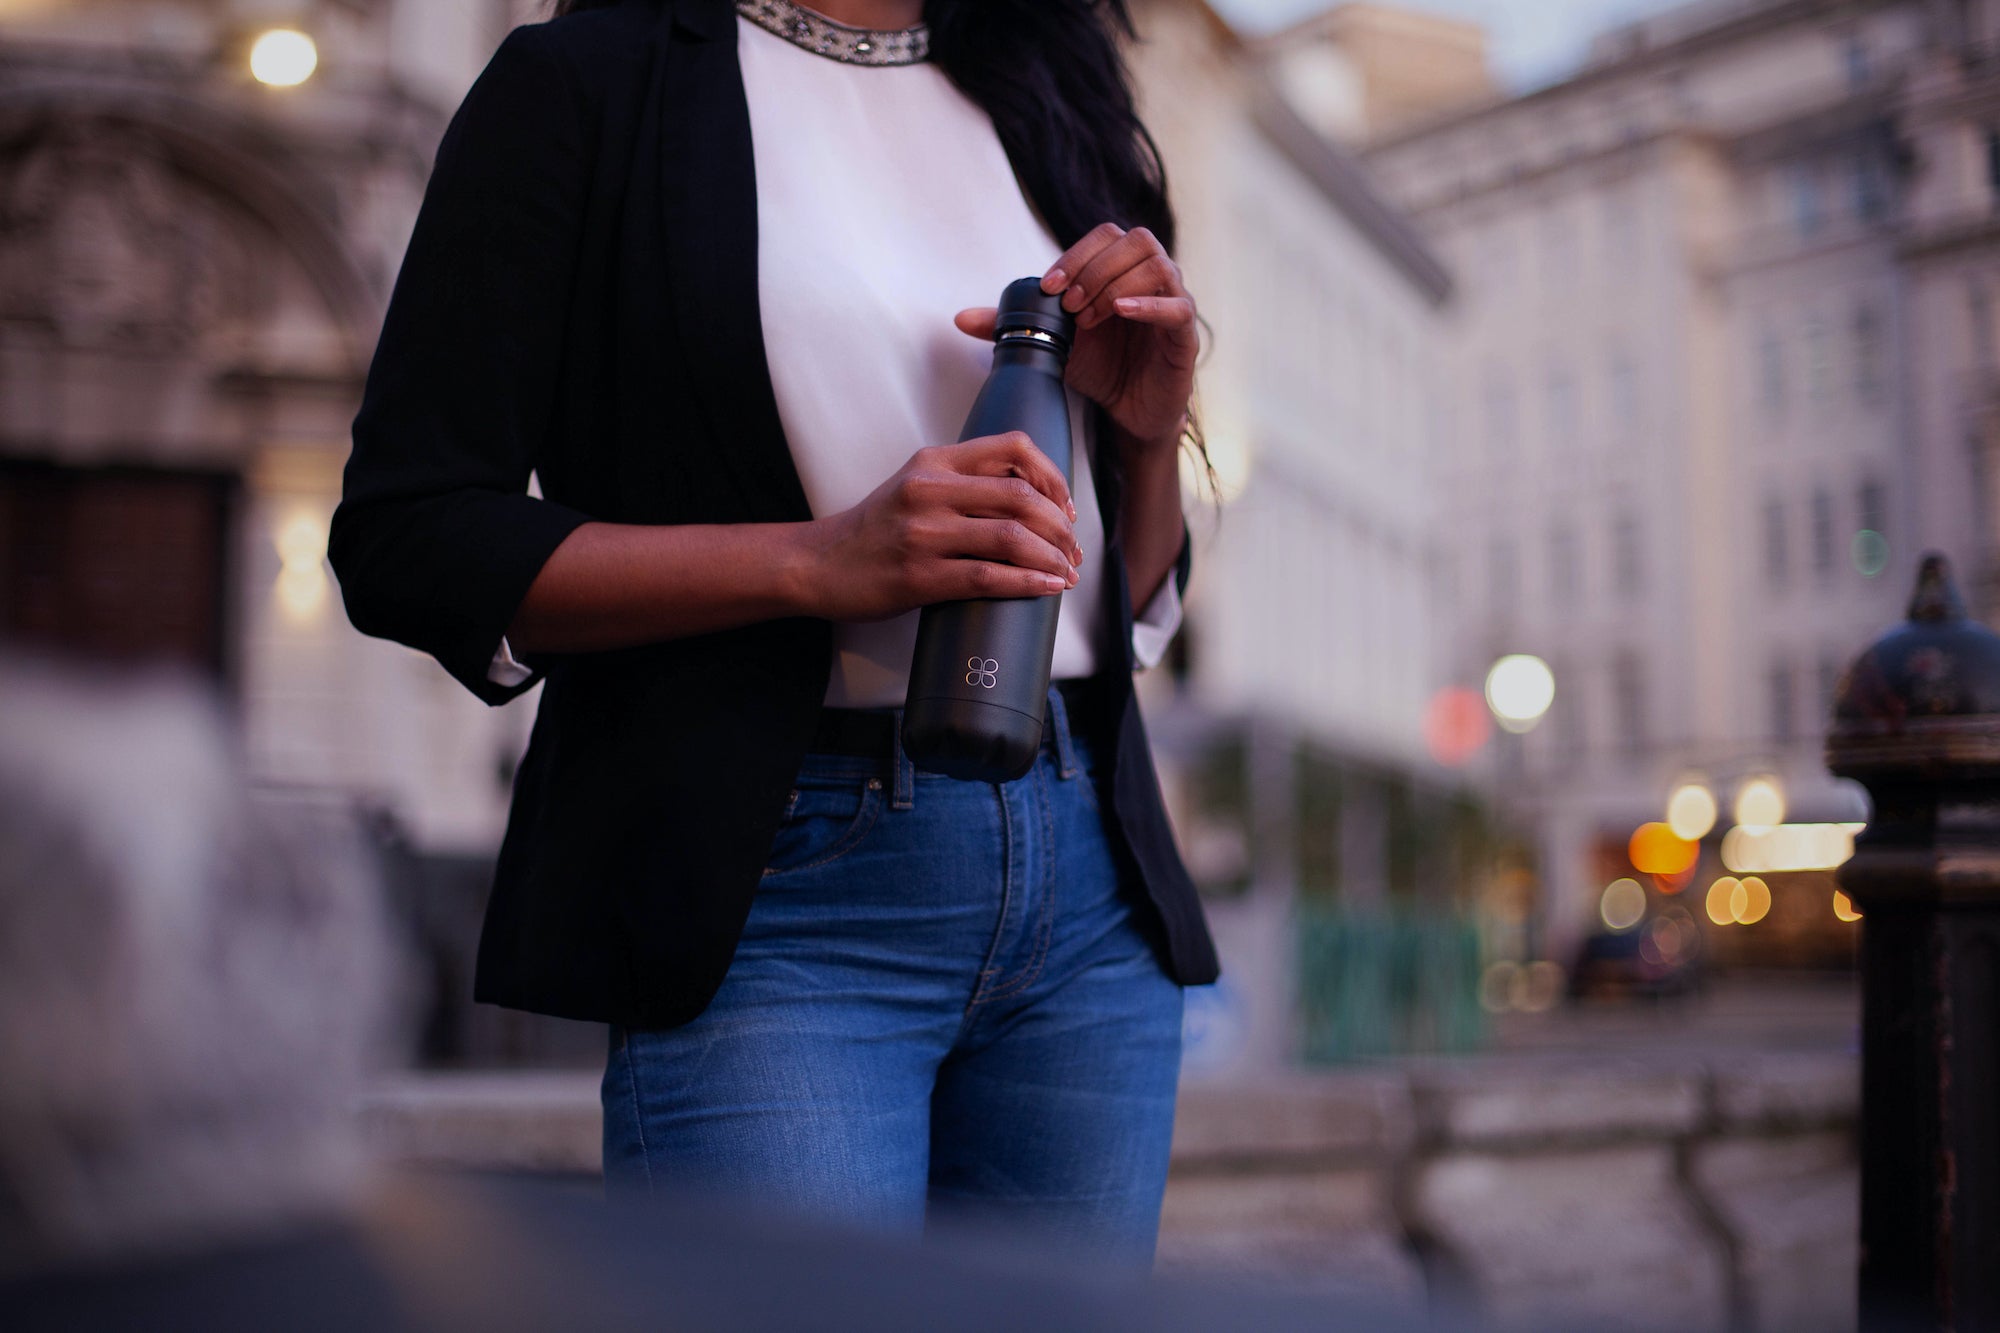 Lady holding a black metal bottle in a city center